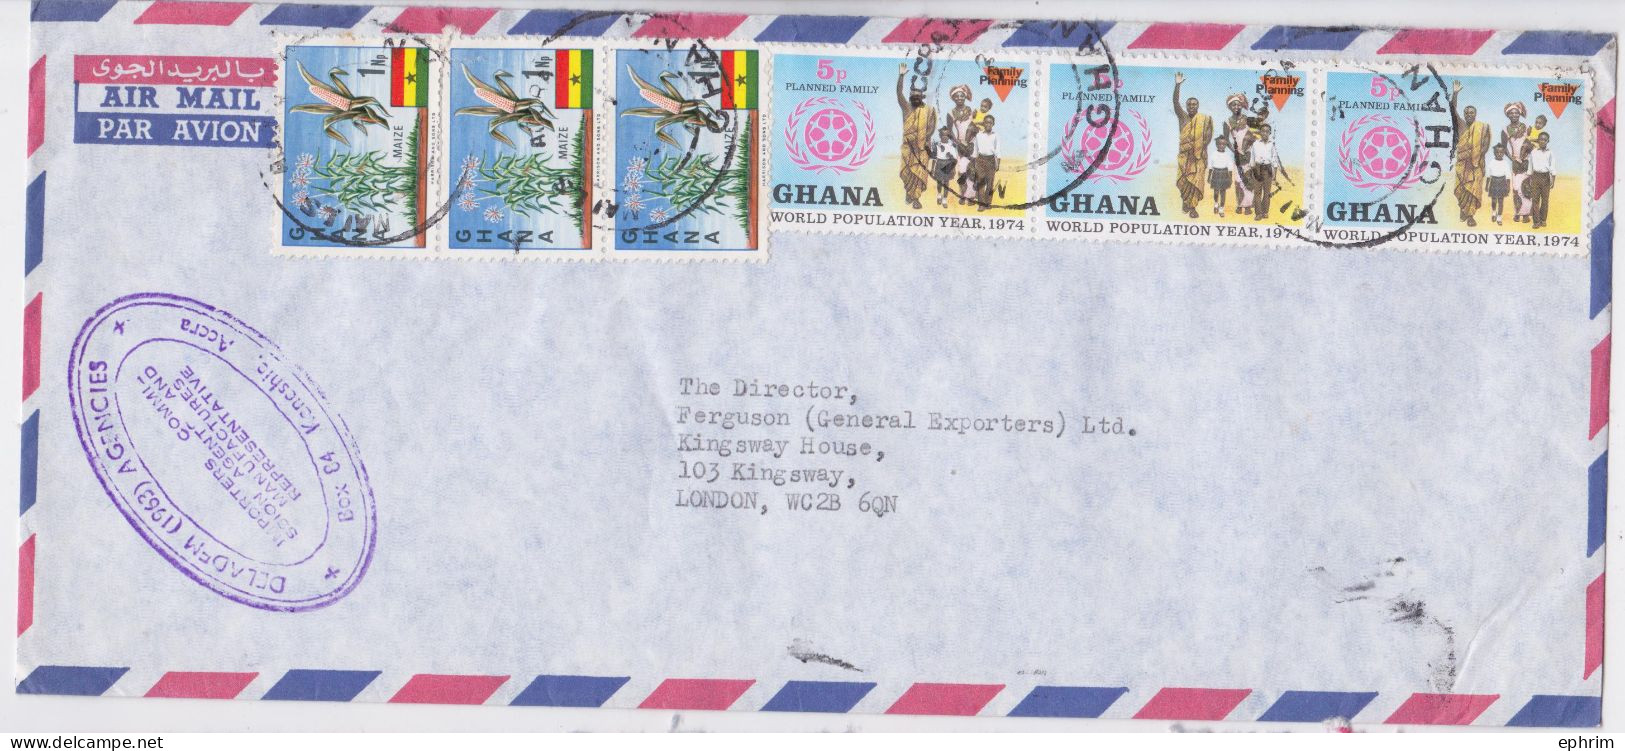 Ghana Lettre Timbre Maïs Maize Planned Family Stamp X6 Air Mail Cover - Ghana (1957-...)